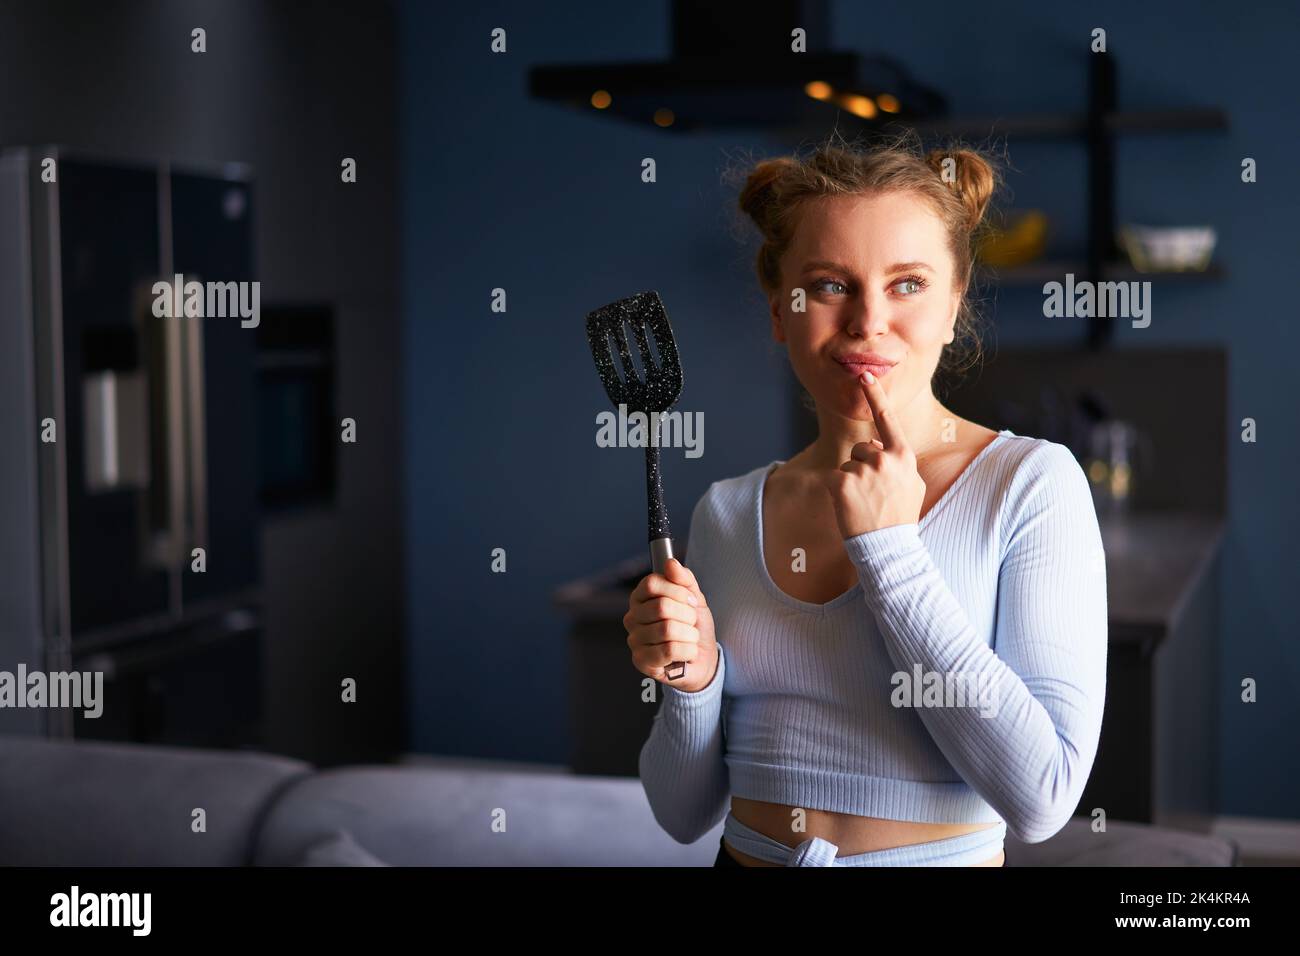 Young thoughtful caucasian blonde woman holding black spatula smiling cunningly standing at home on a dark modern stylish kitchen background. Young Stock Photo